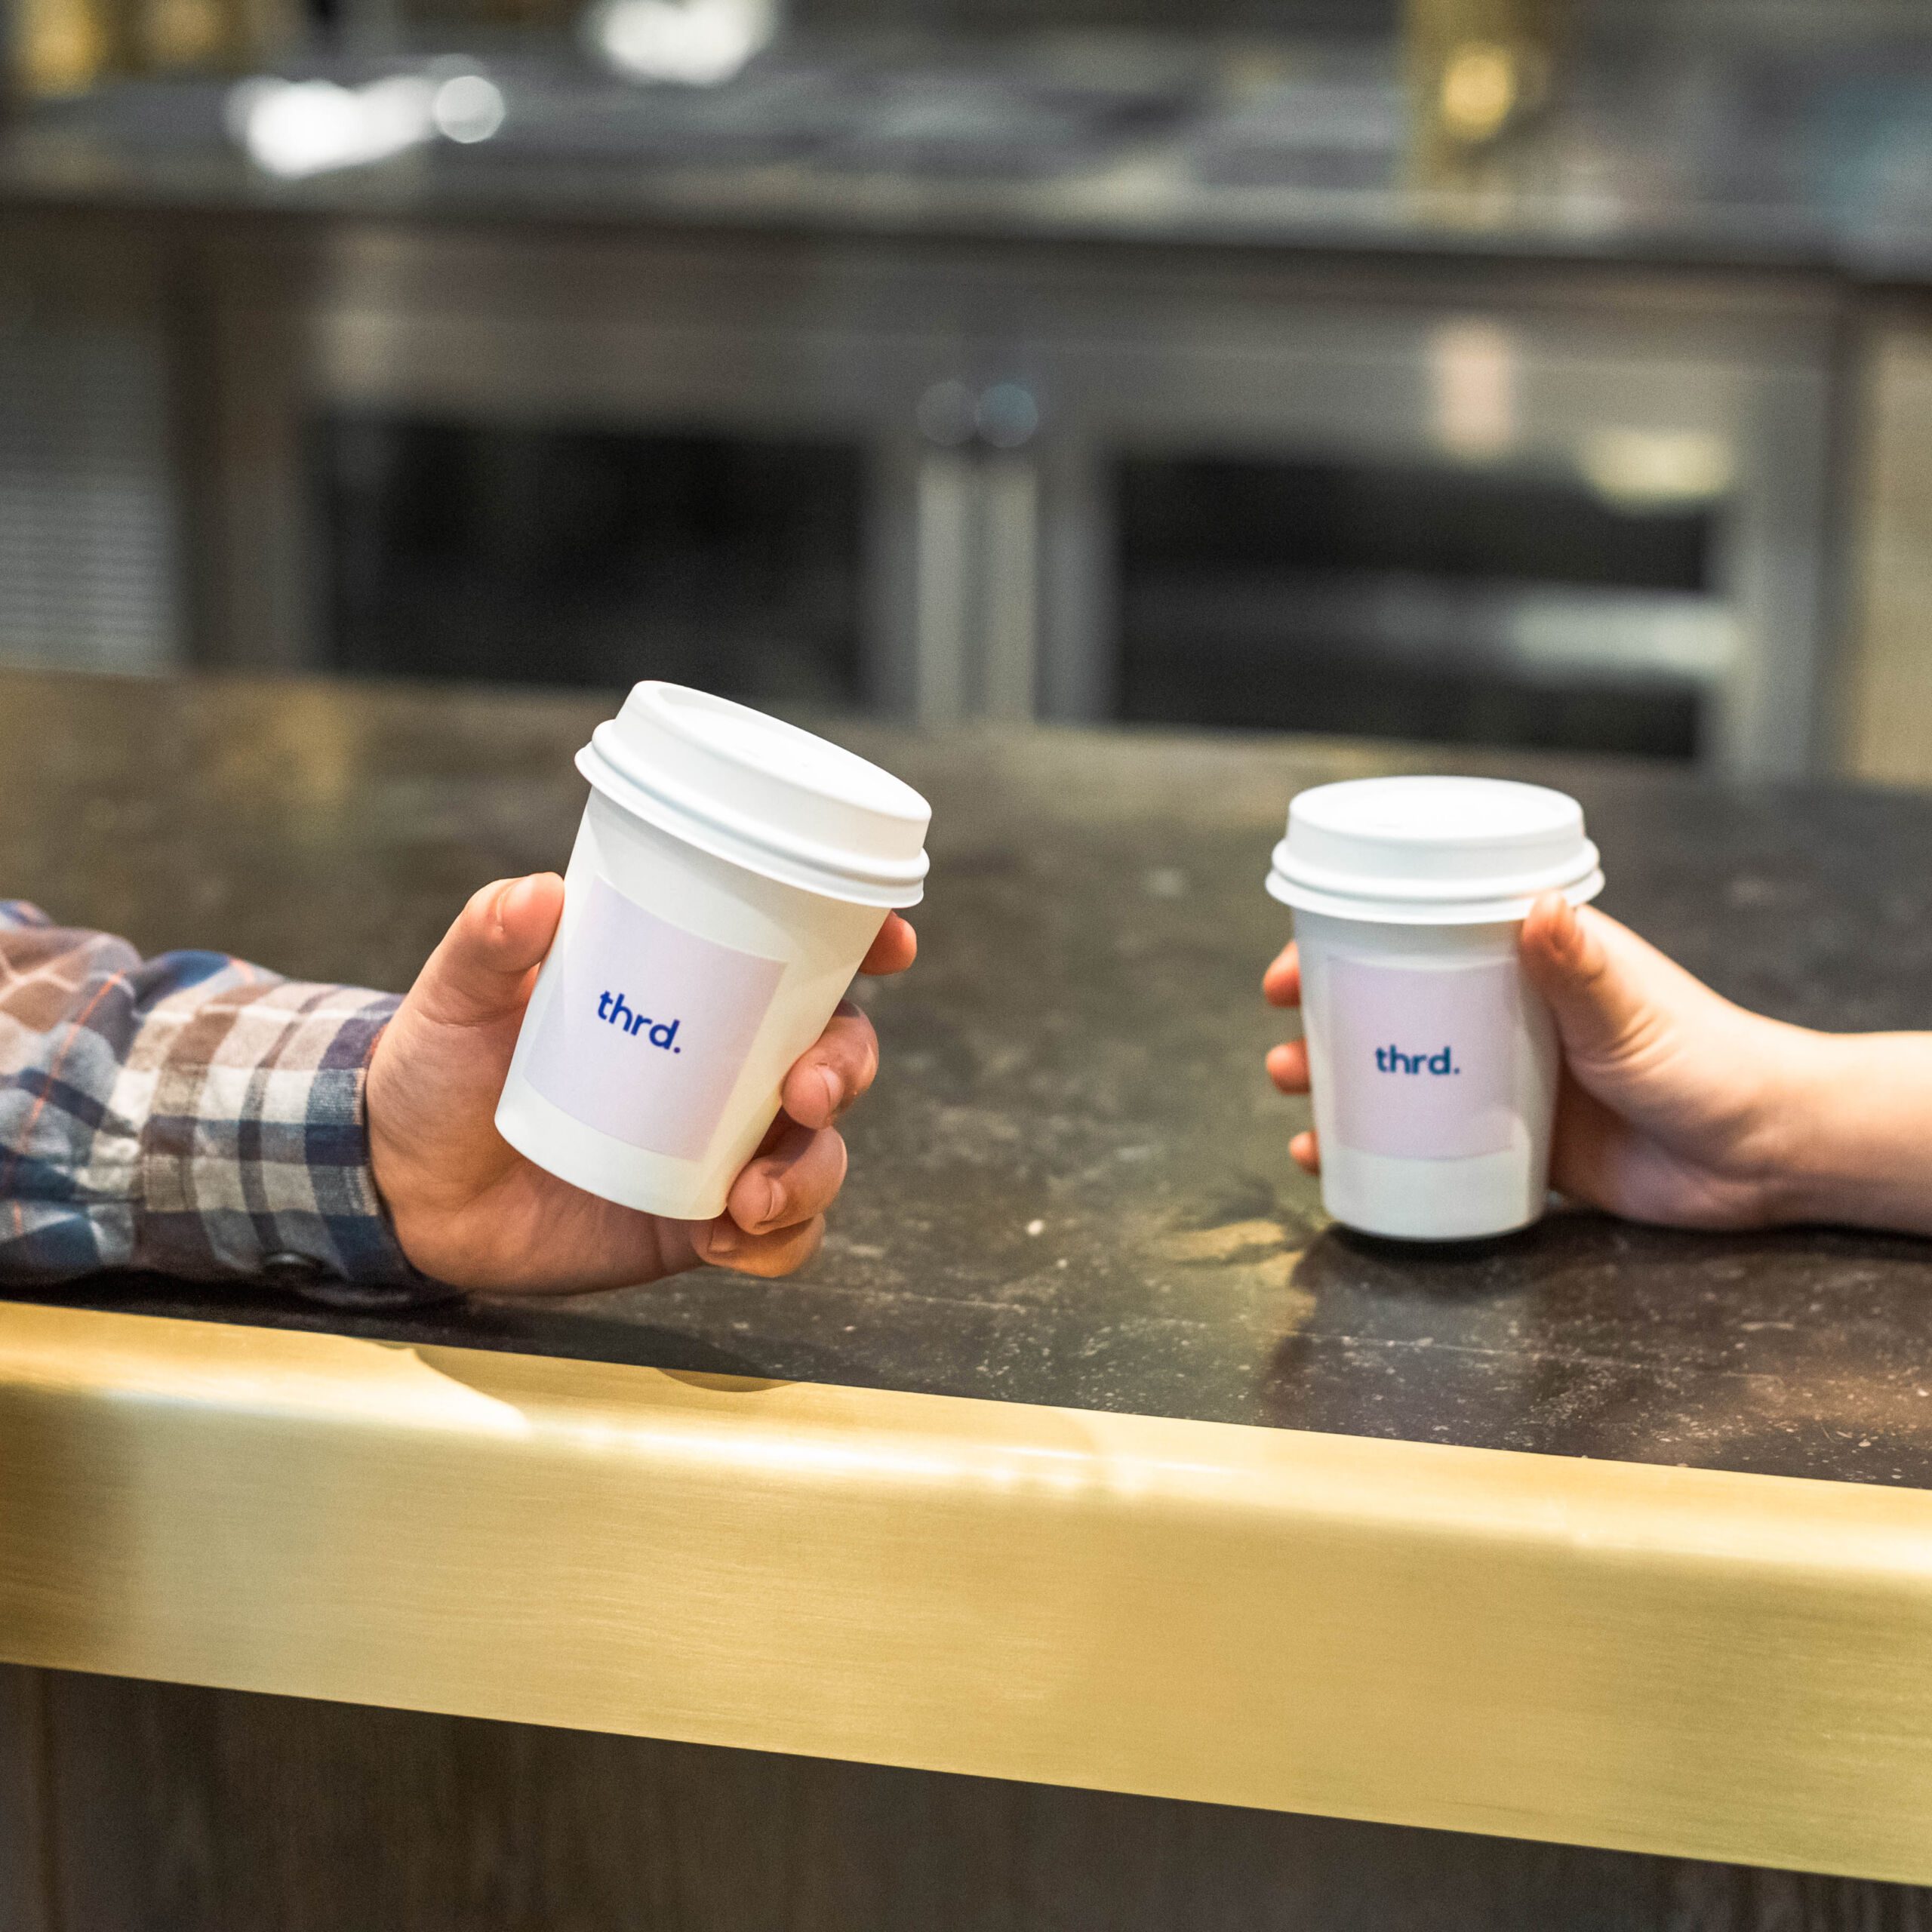 Photo shows two hands holding Thrd Coffee Company branded coffee cups. The hands are leaning against a countertop.